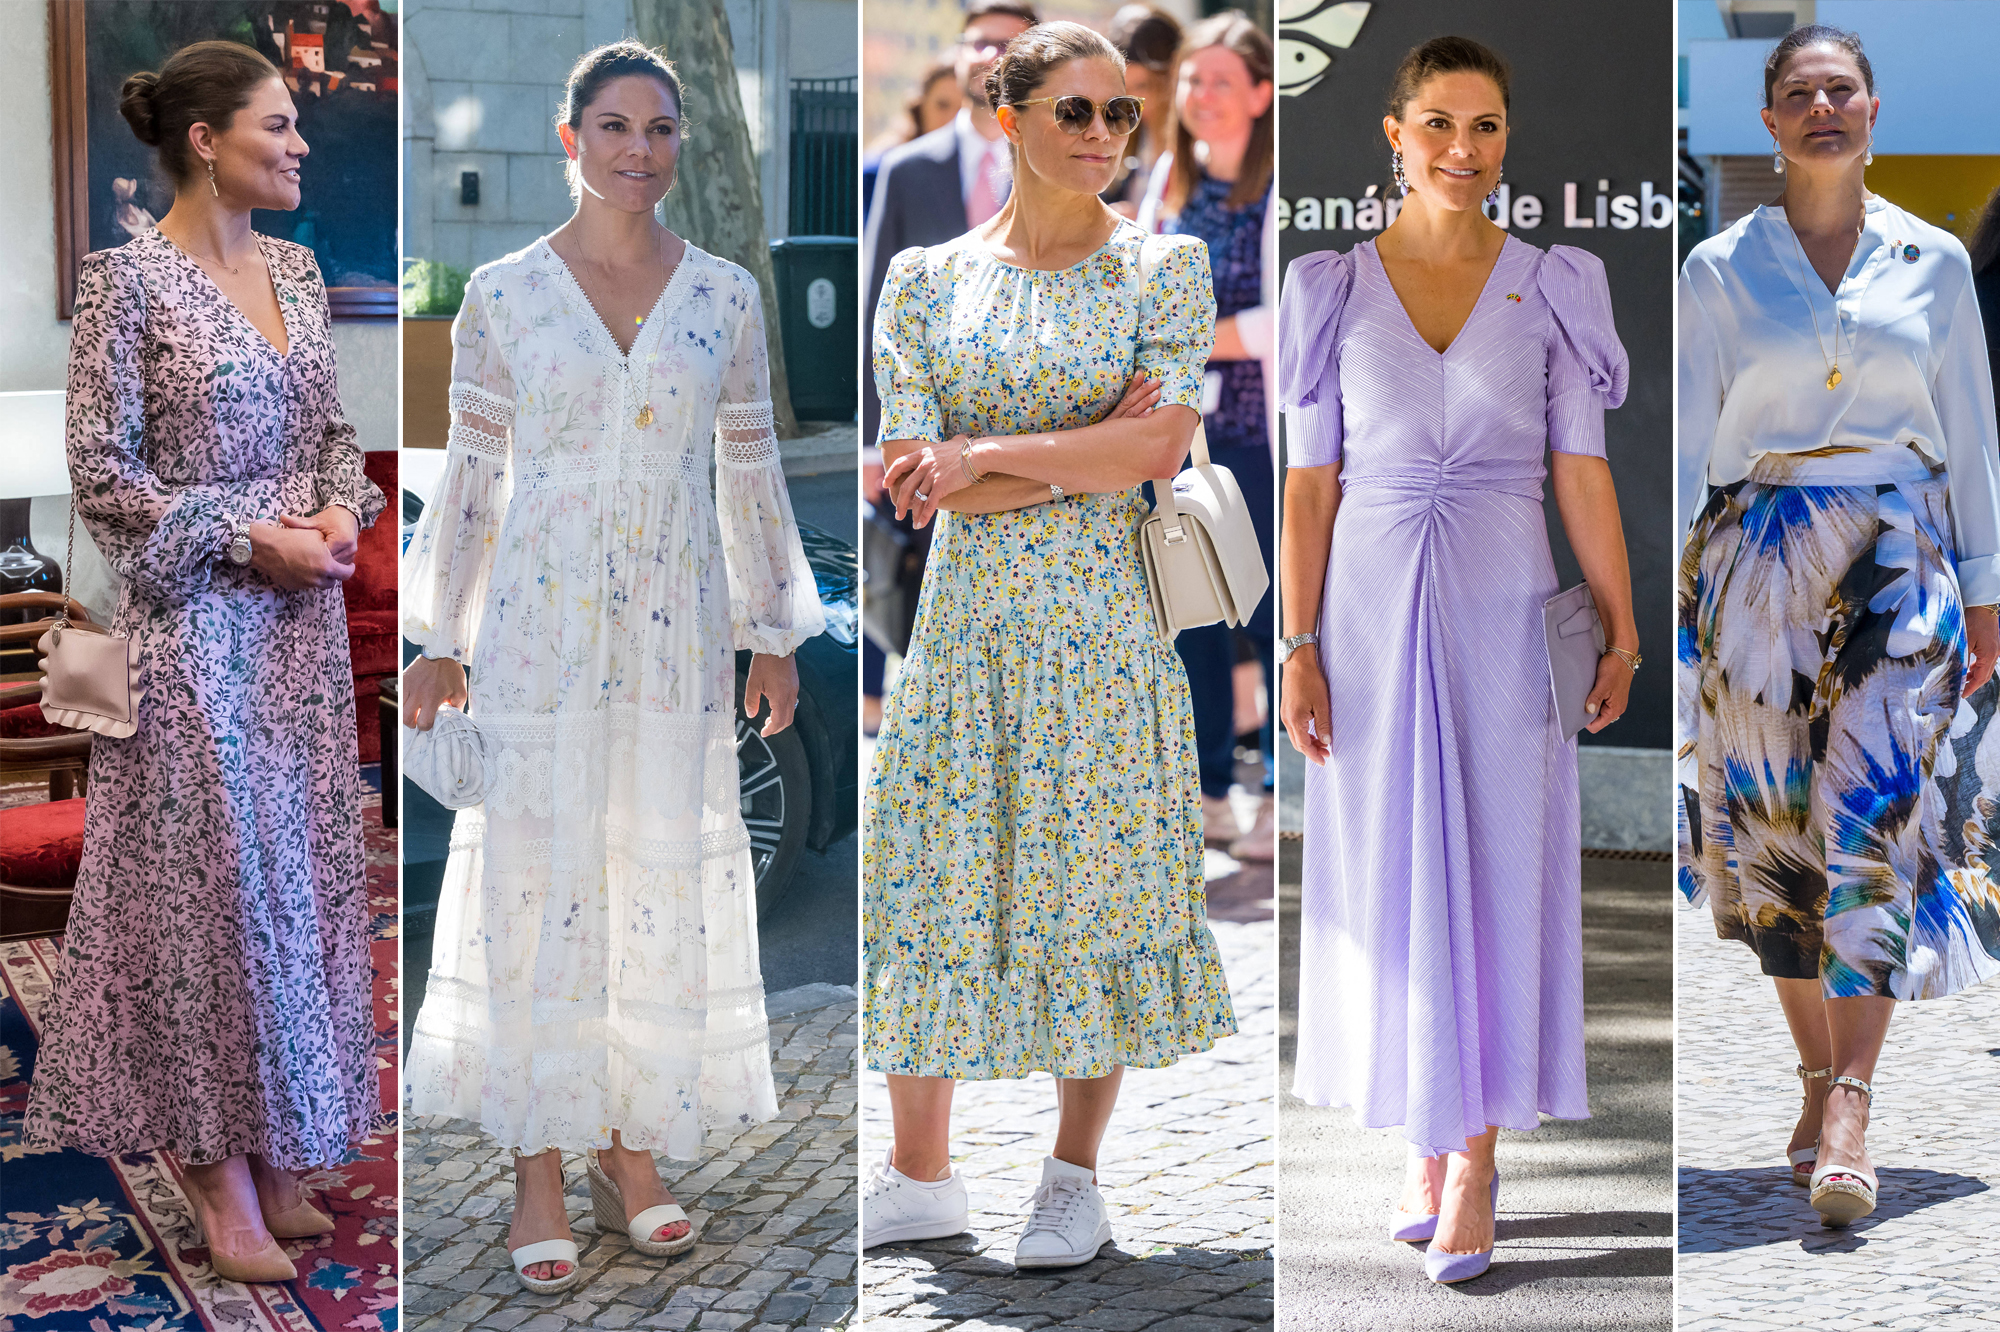 Royal Style – Victoria, back to her two-day appearance in Lisbon